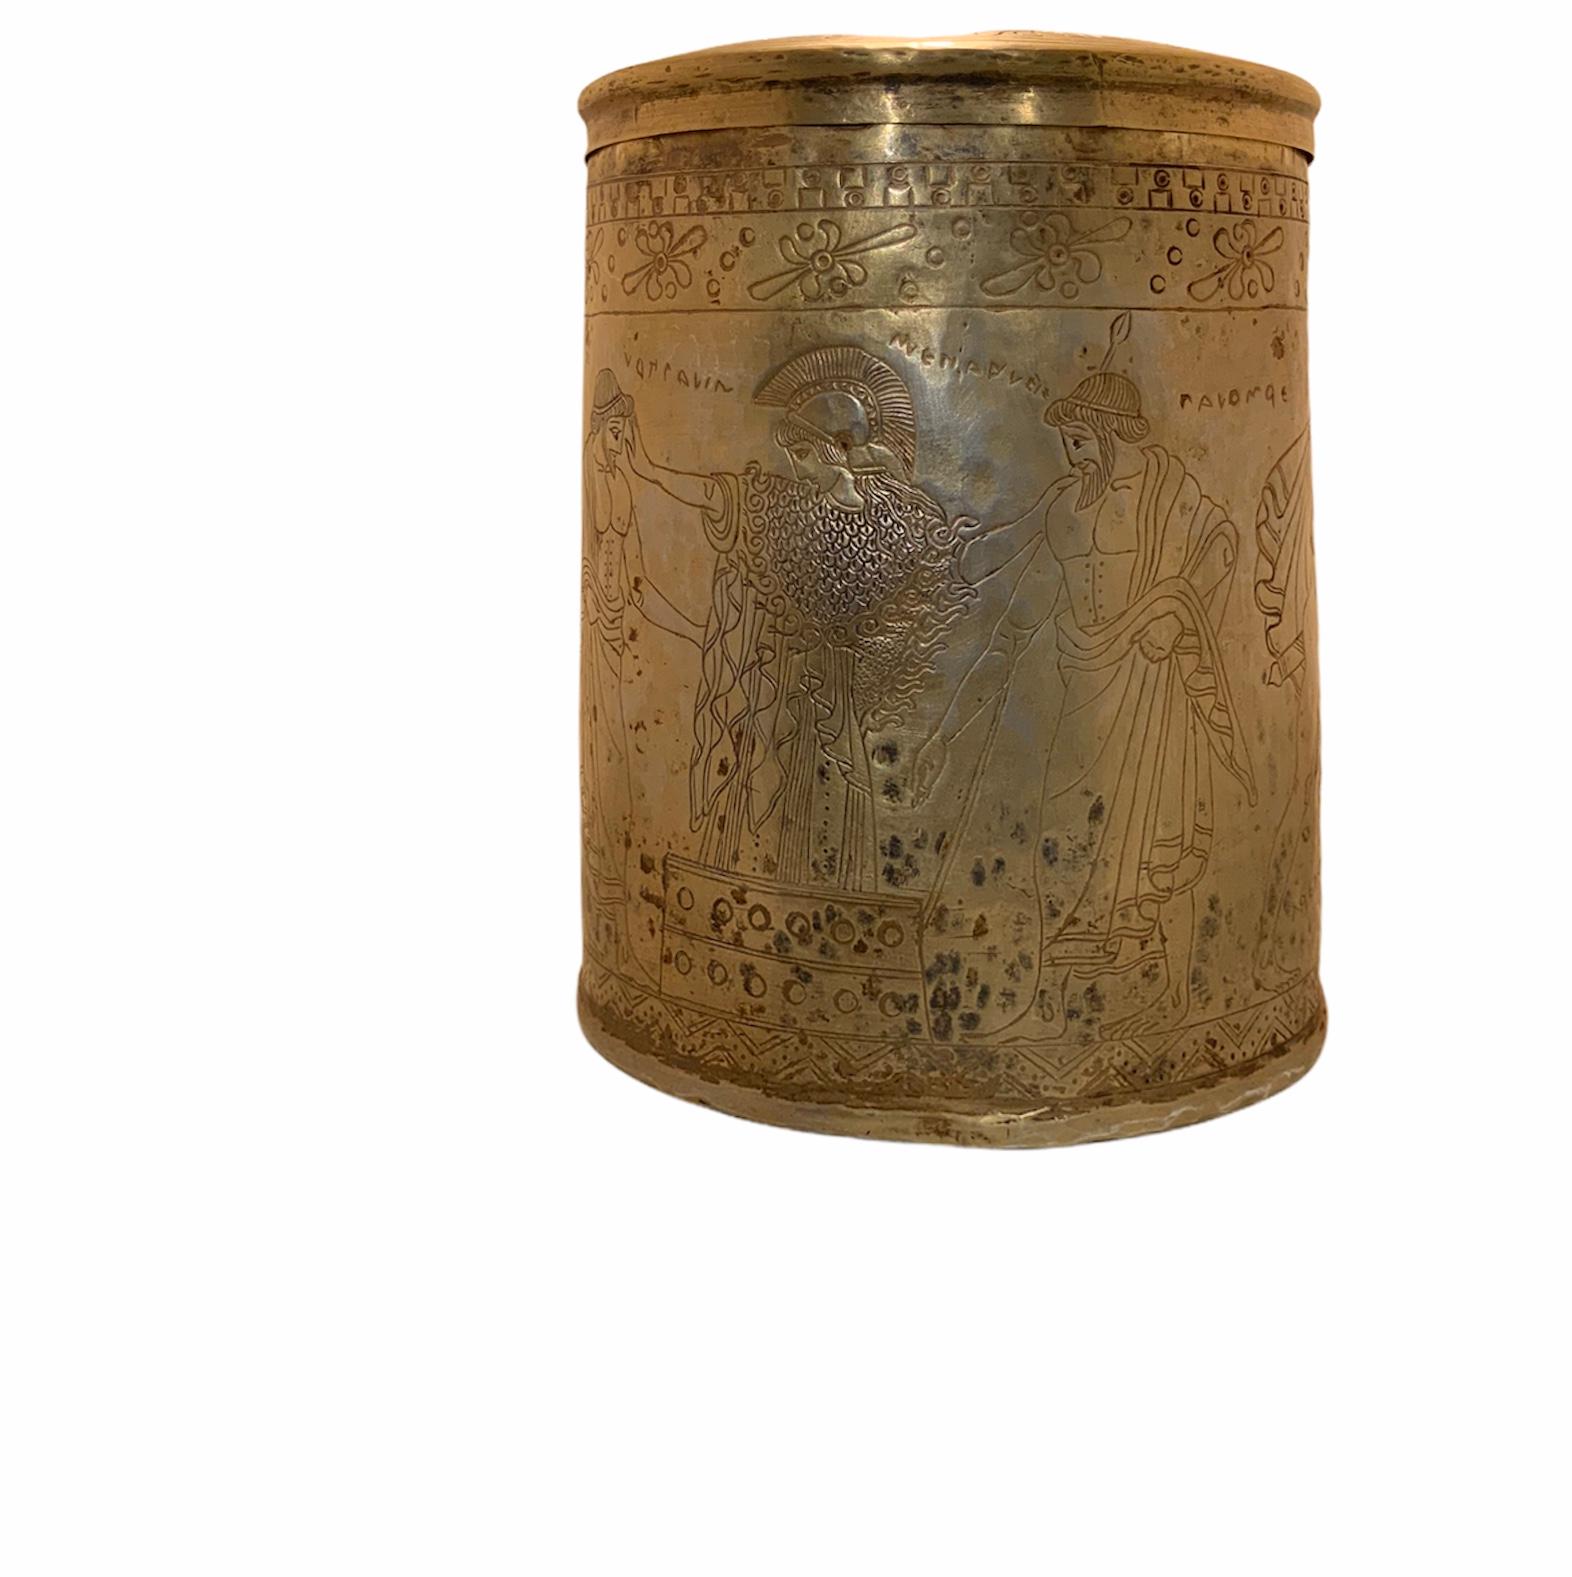 This is a Greek style engraved and chased gold tone metal large Pyxis ( a cylindrical vessel/box with a lid that can be made of wood, ivory or metal). In the ancient times, it was mostly used by women to storage and transport trinkets, jewelry and